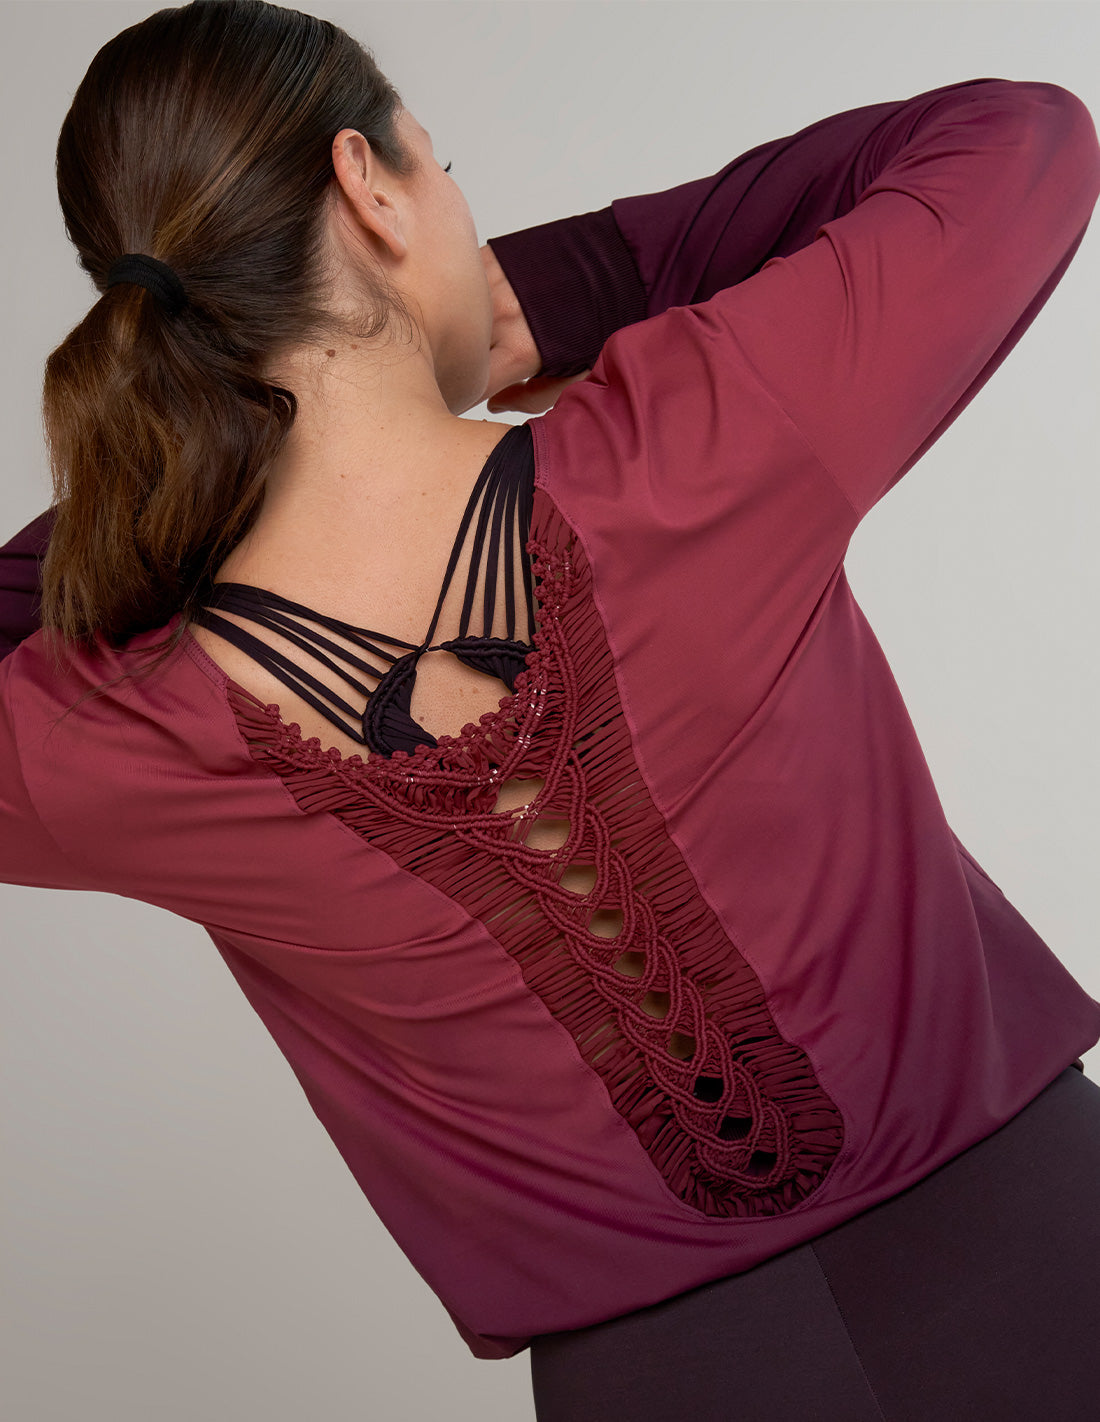 Senses Blouse Faded Purple. Hand-Dyed Blouse With Hand Woven Macramé In Faded Purple. Entreaguas